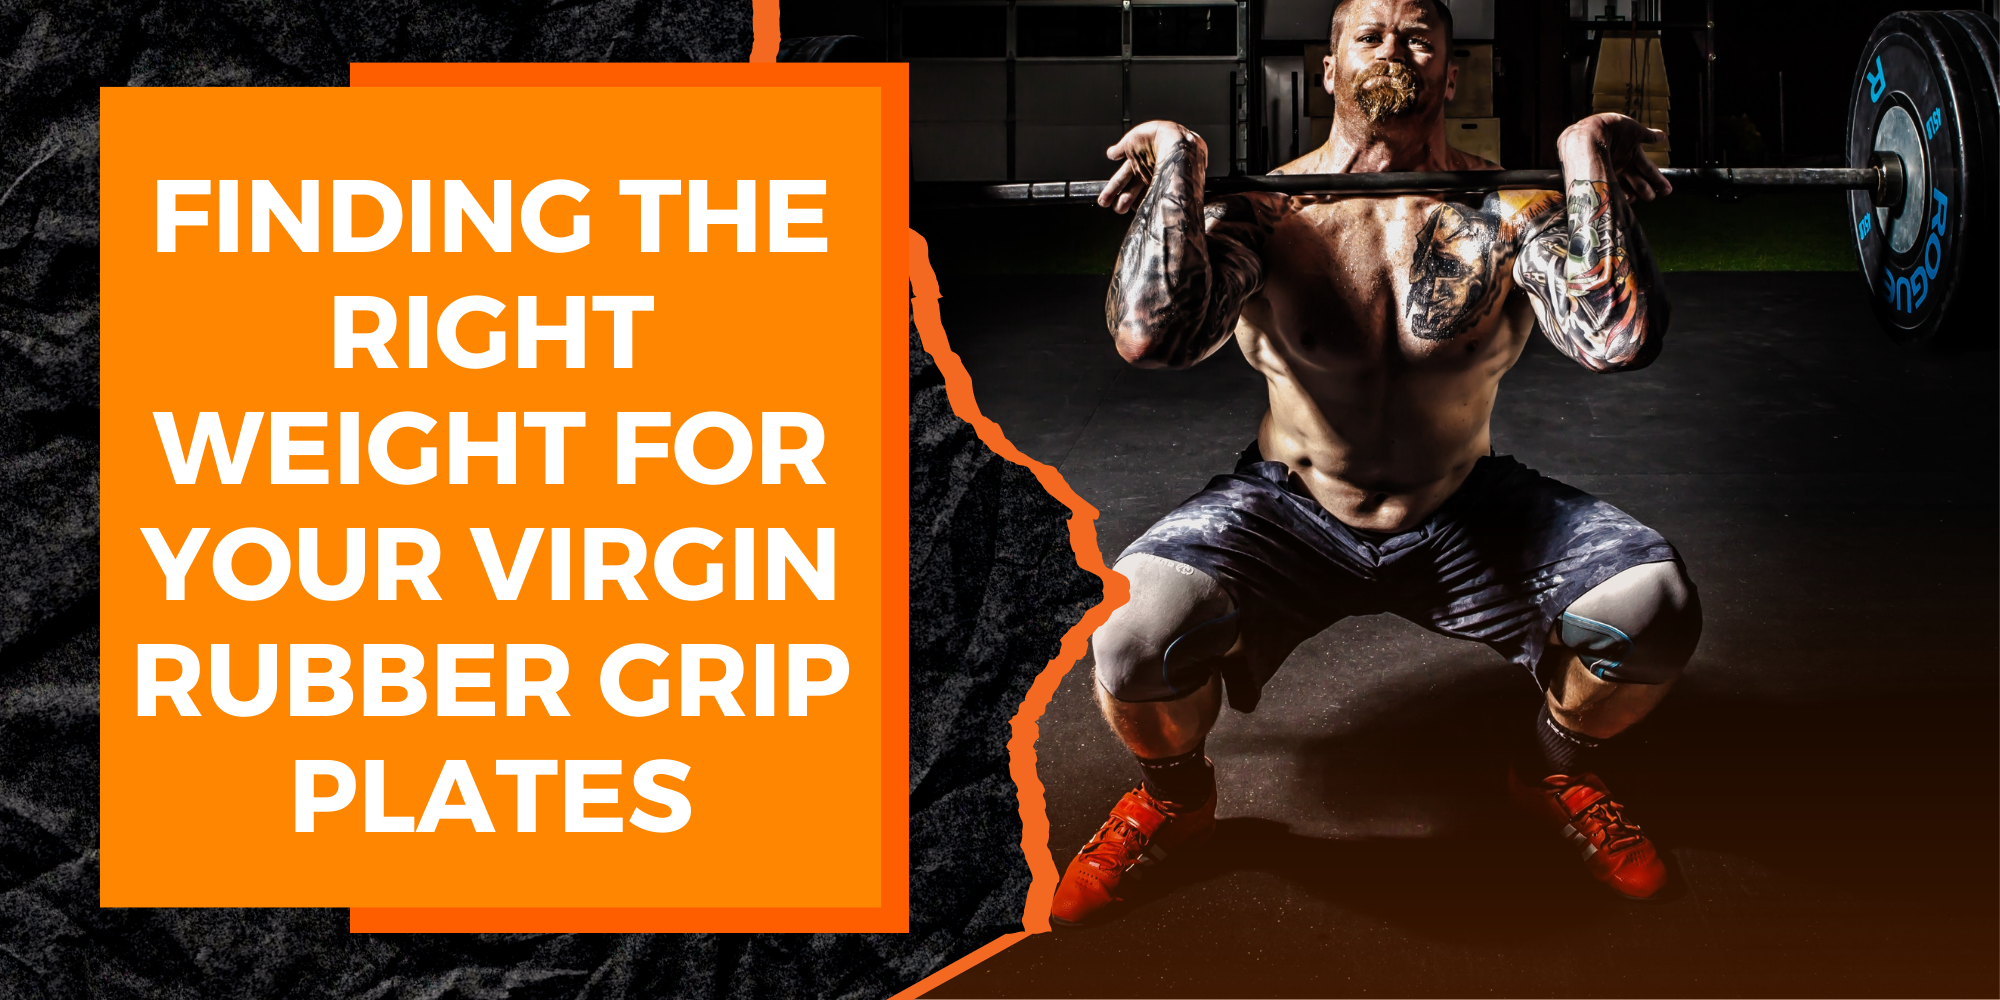 Finding the Right Weight for Your Virgin Rubber Grip Plates